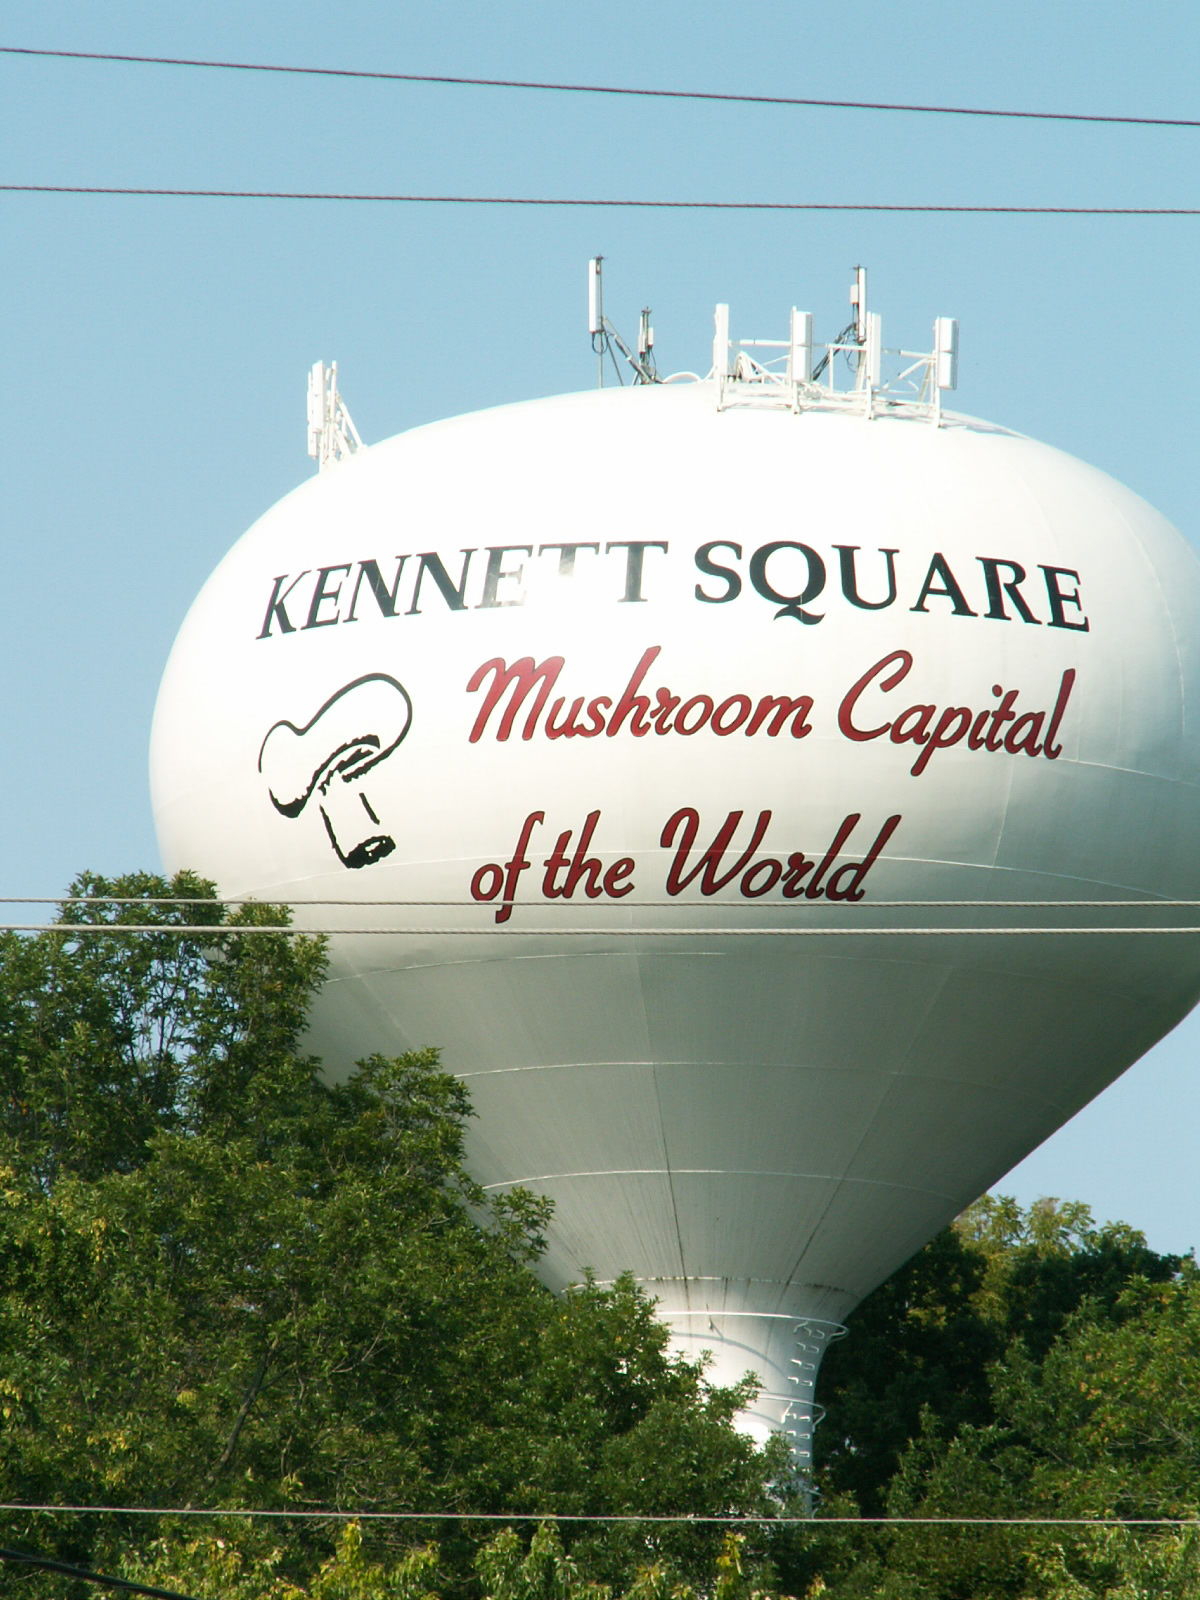 Kennett Square's Water Tower proclaims it the Mushroom Capital of the World